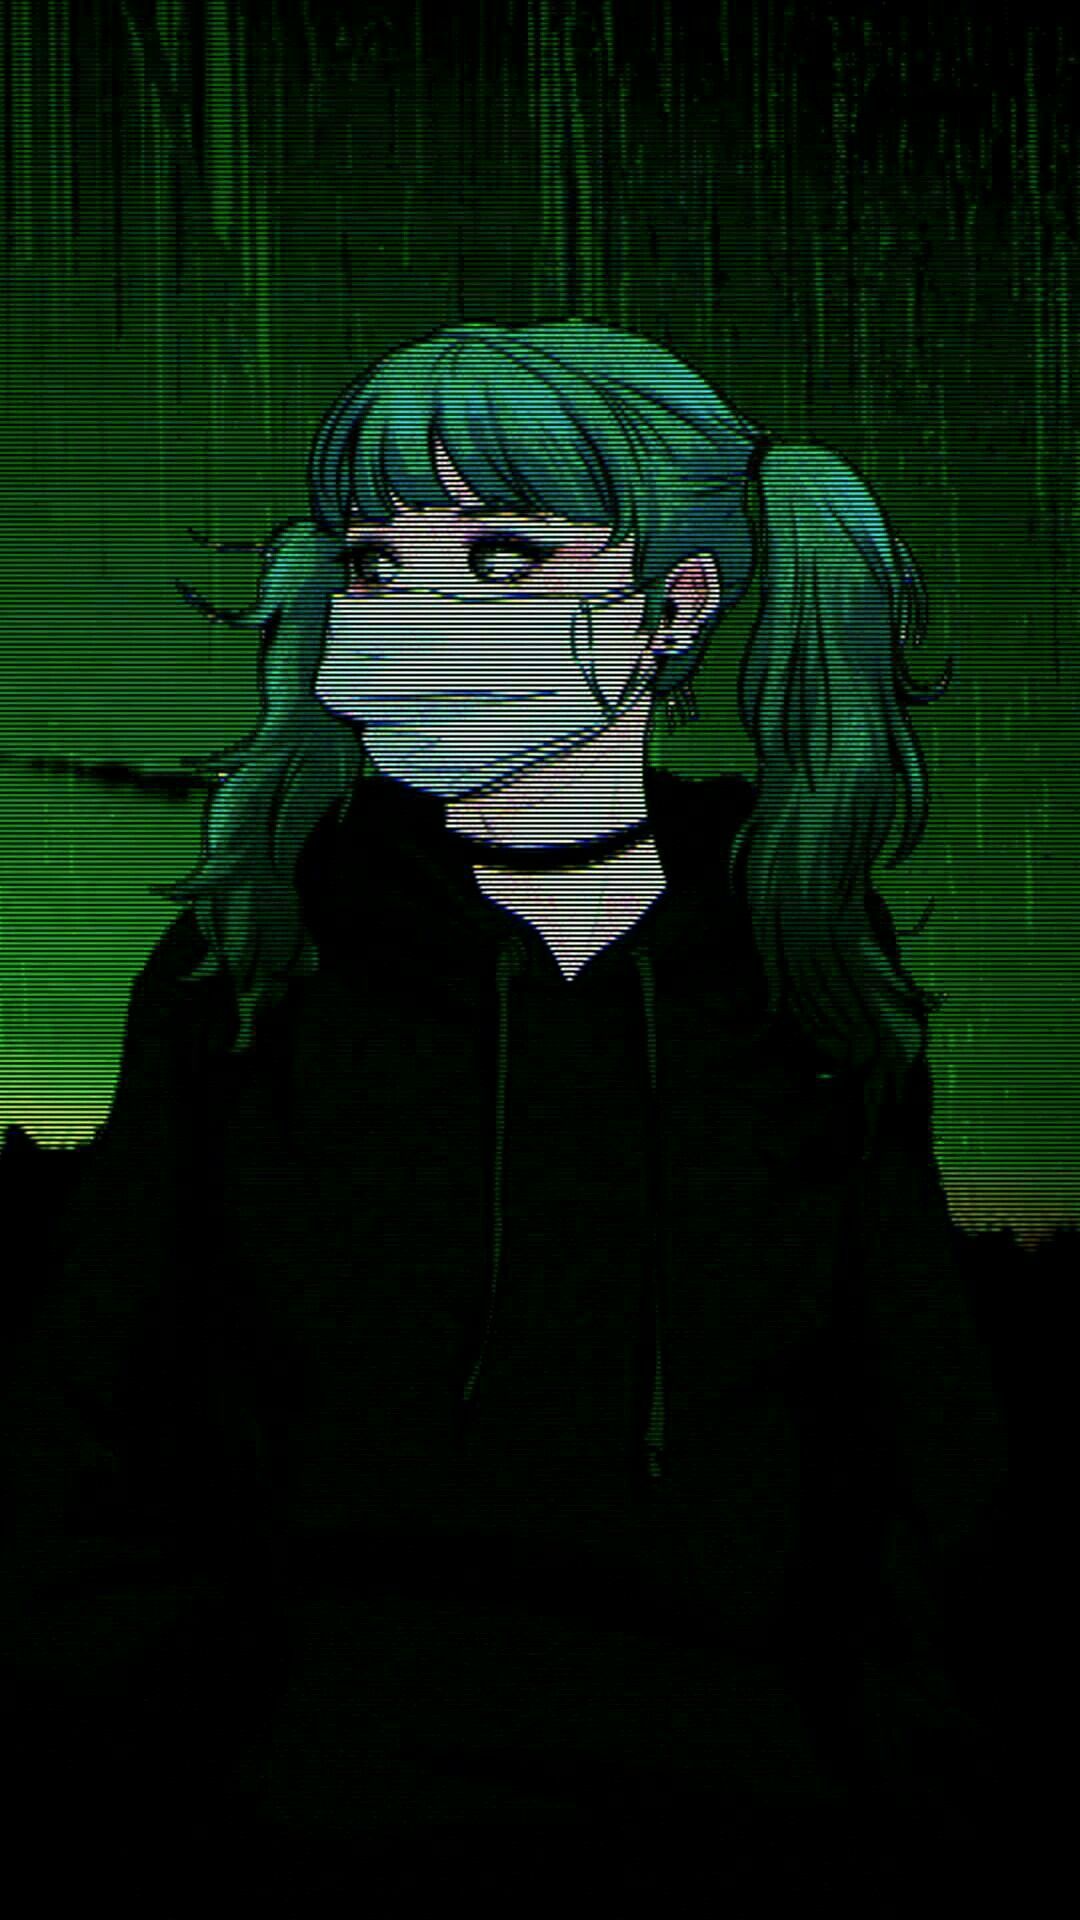 Anime Aesthetic Wallpapers Data-src /large/5440597 - Aesthetic Anime  Wallpaper Iphone - 1080x1920 Wallpaper 